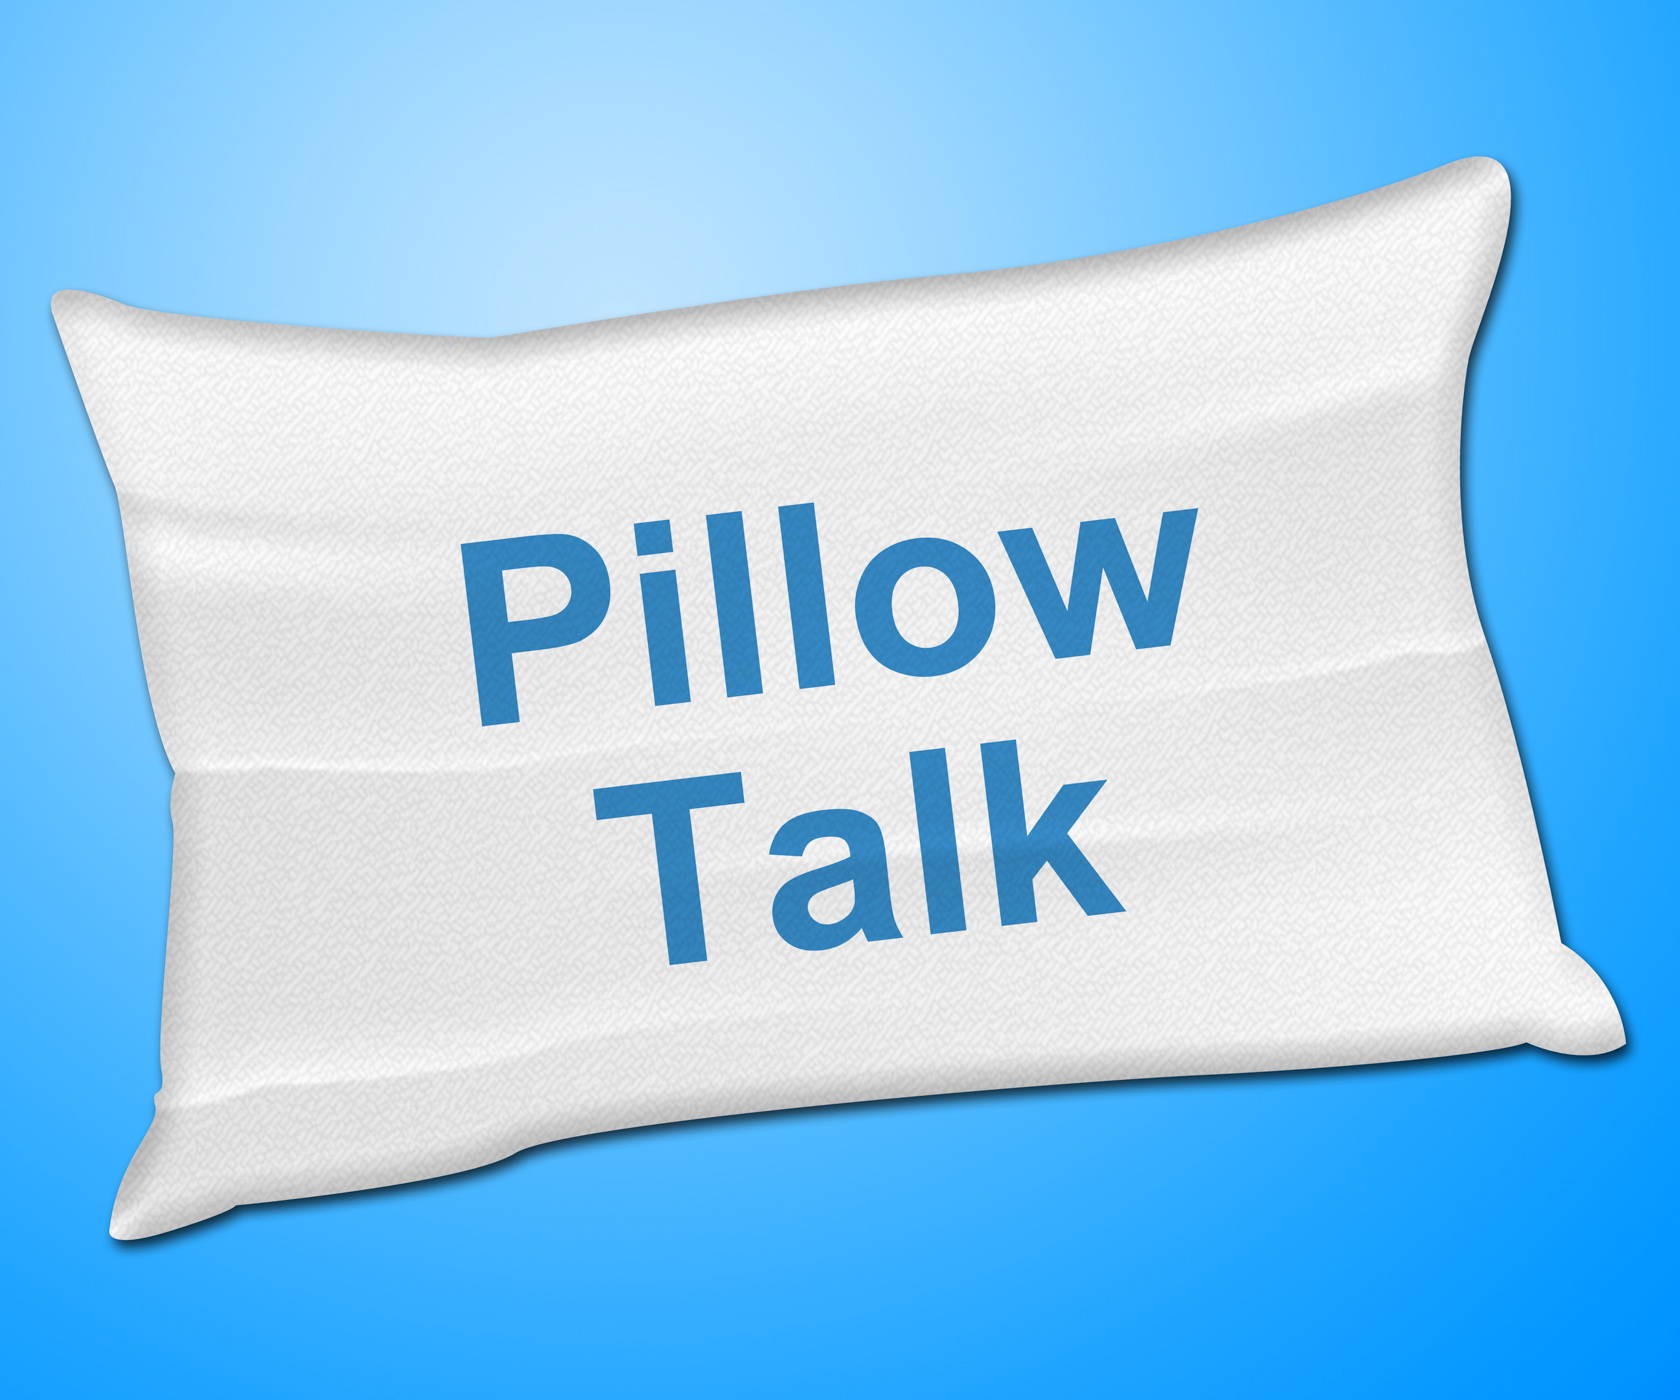 Pillow Talk Means Talking Conversation And Discussion, Bed, Explain, Speech, Speaking, HQ Photo